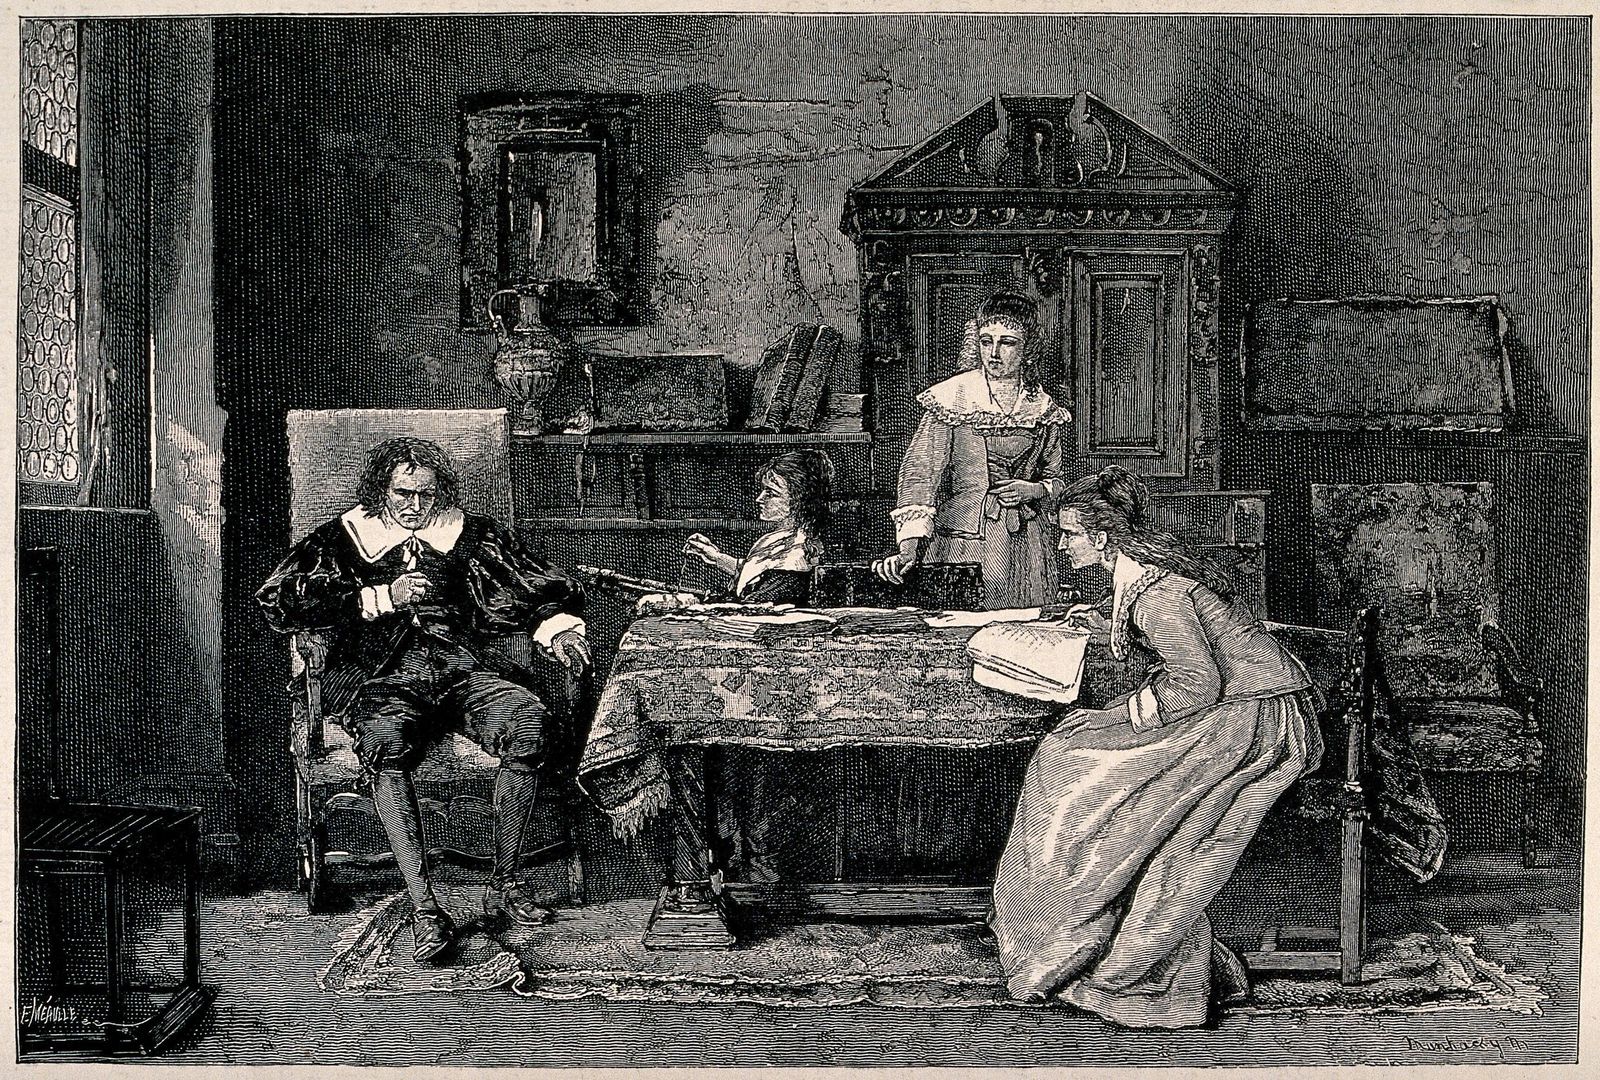 The blind Milton is dictating Paradise Lost (his fanfiction) to his three daughters.